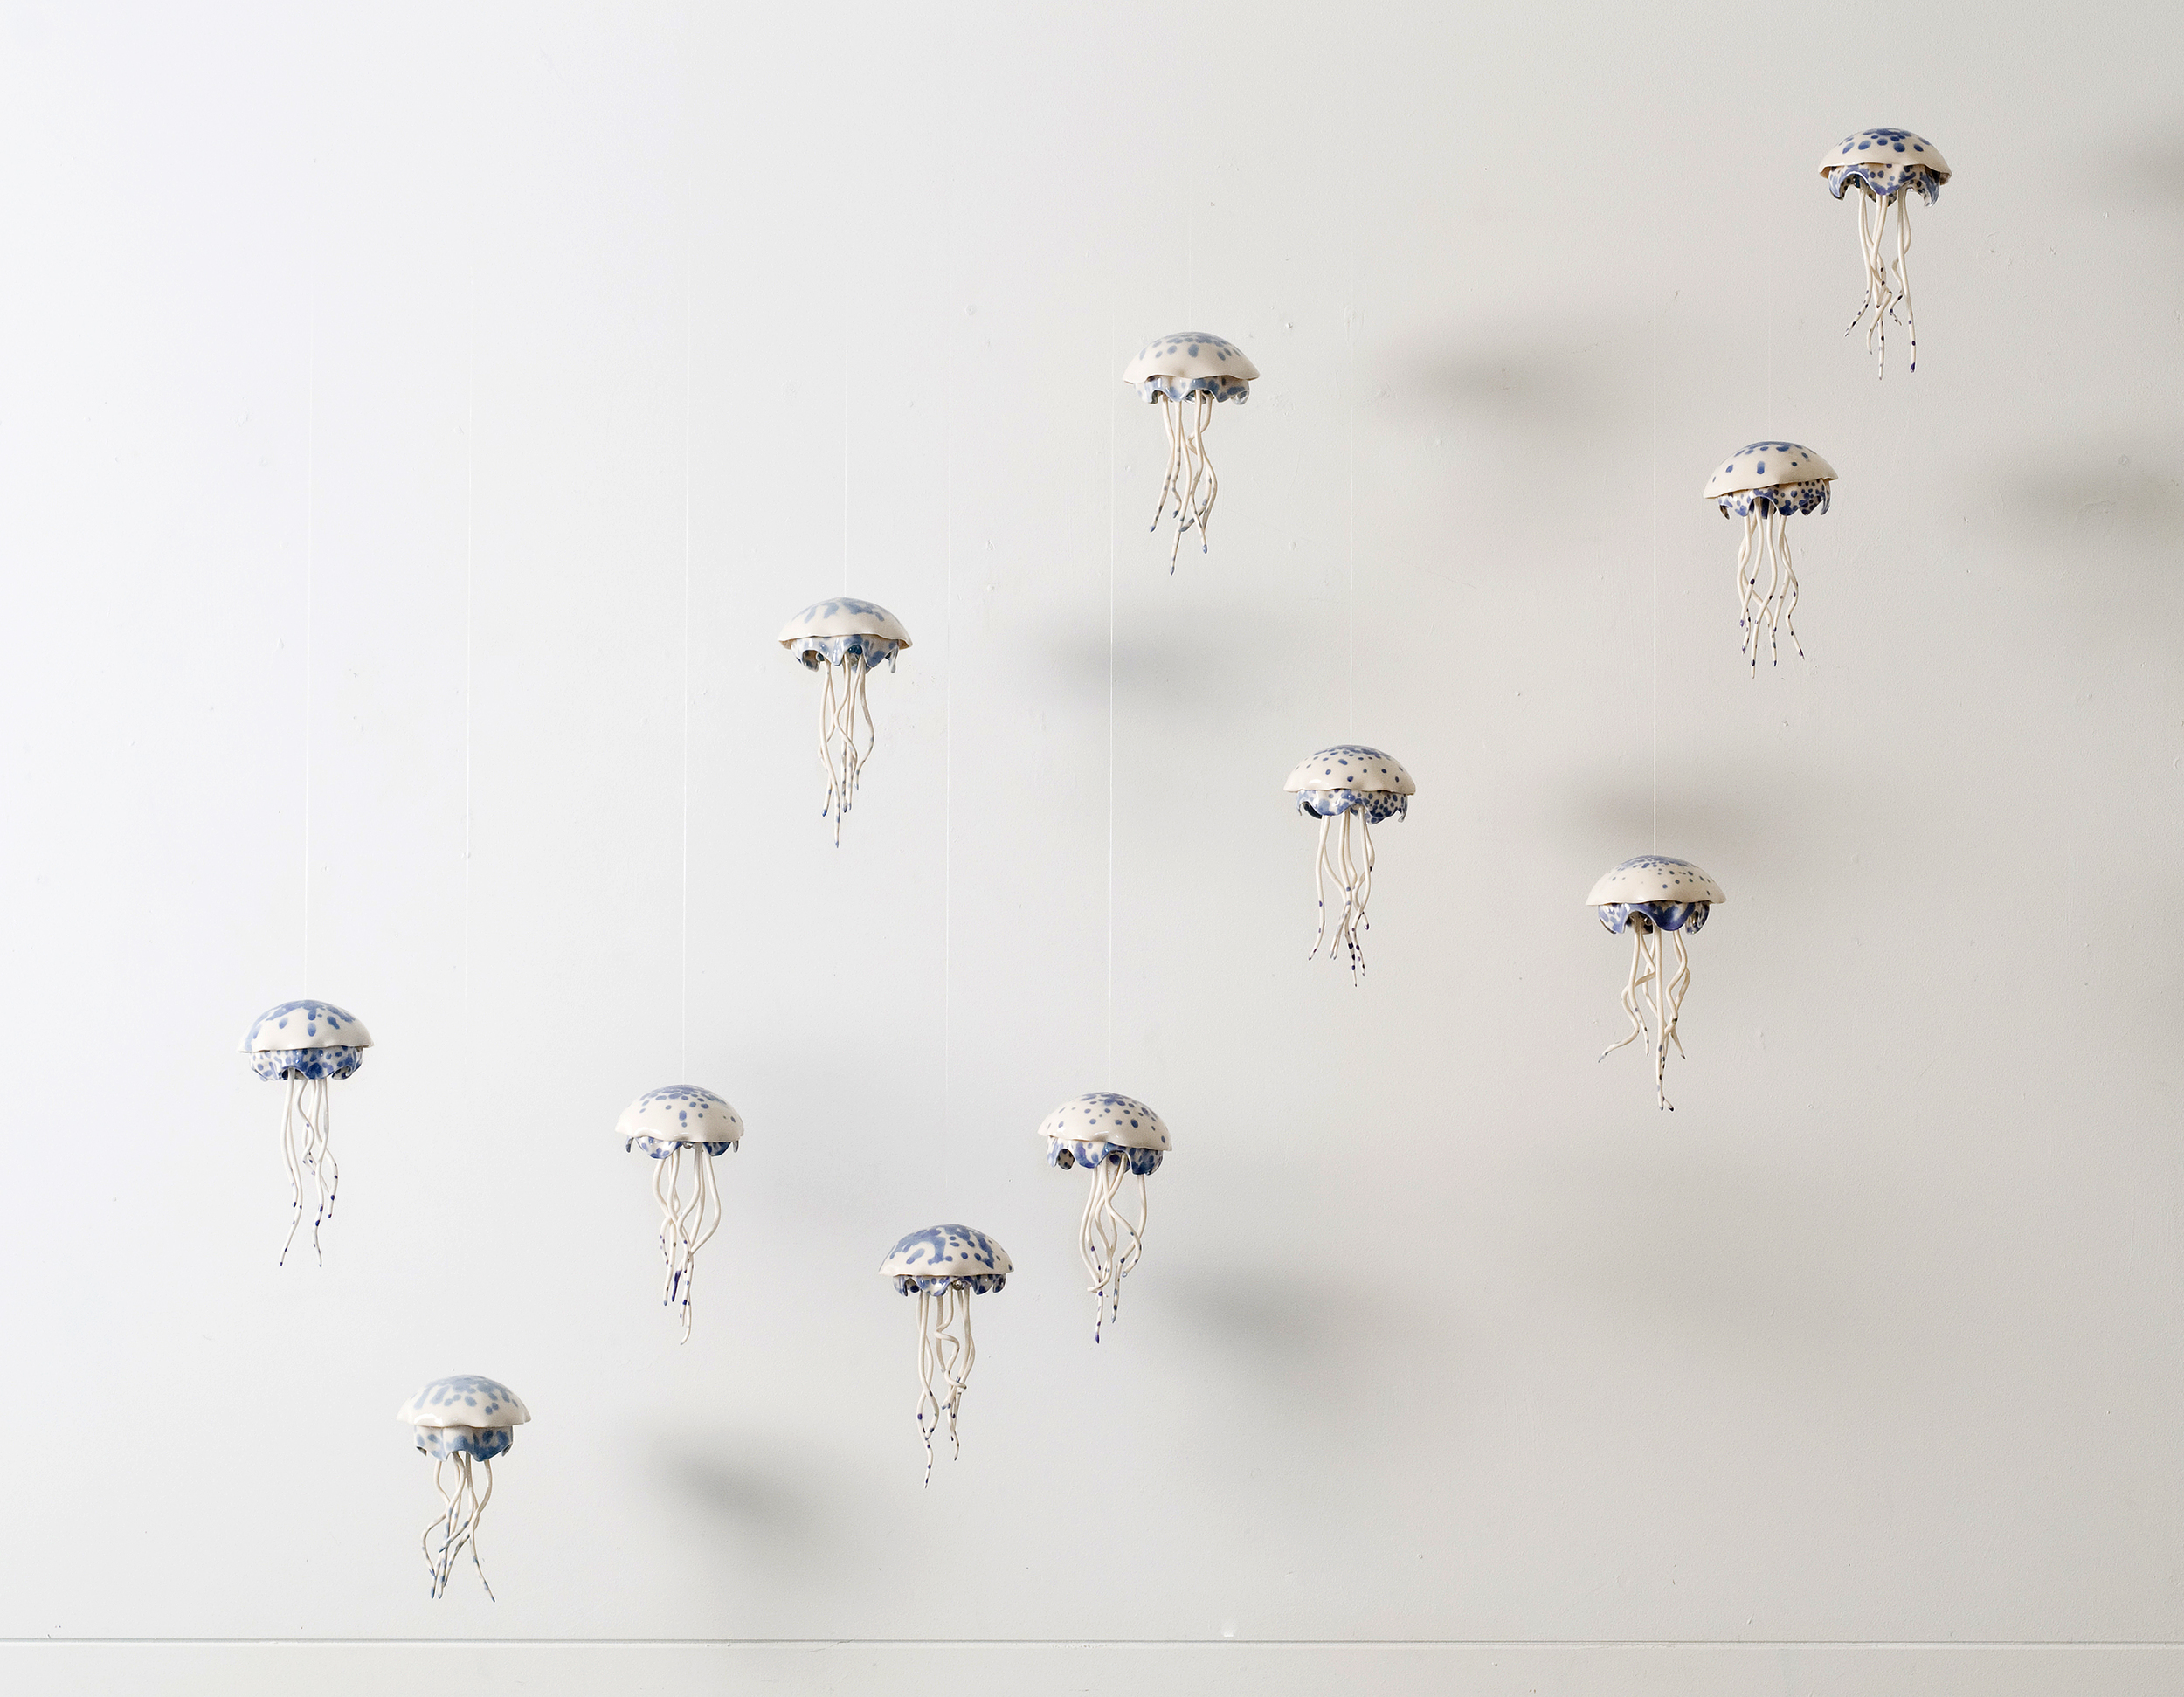  The Cloud Of Jellyfish. 